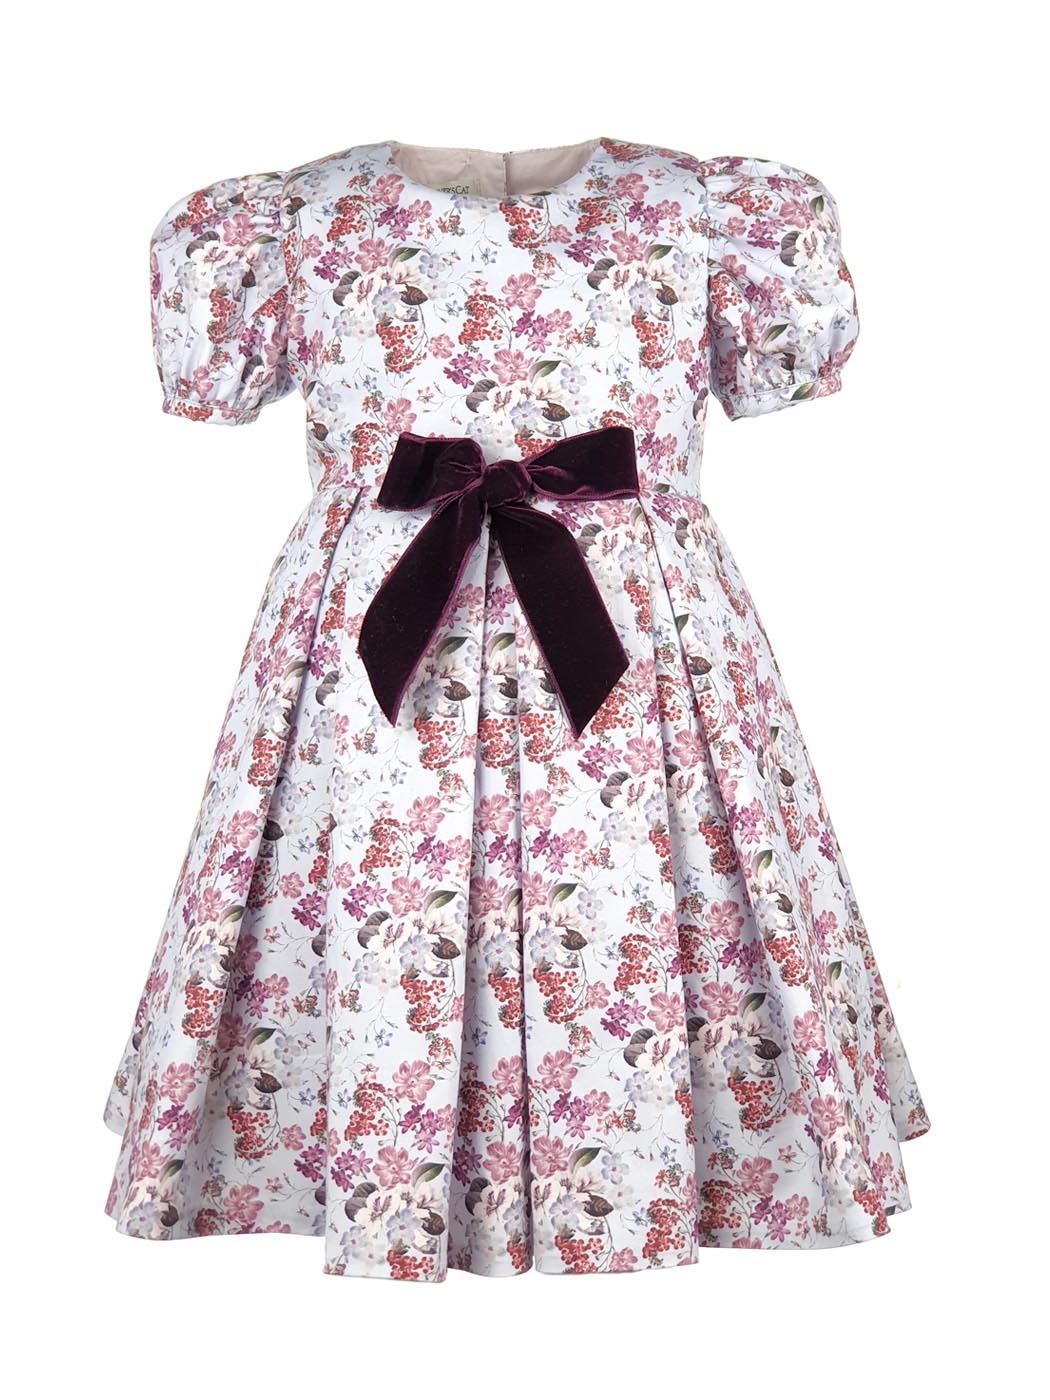 Baby dress with floral print - JADE